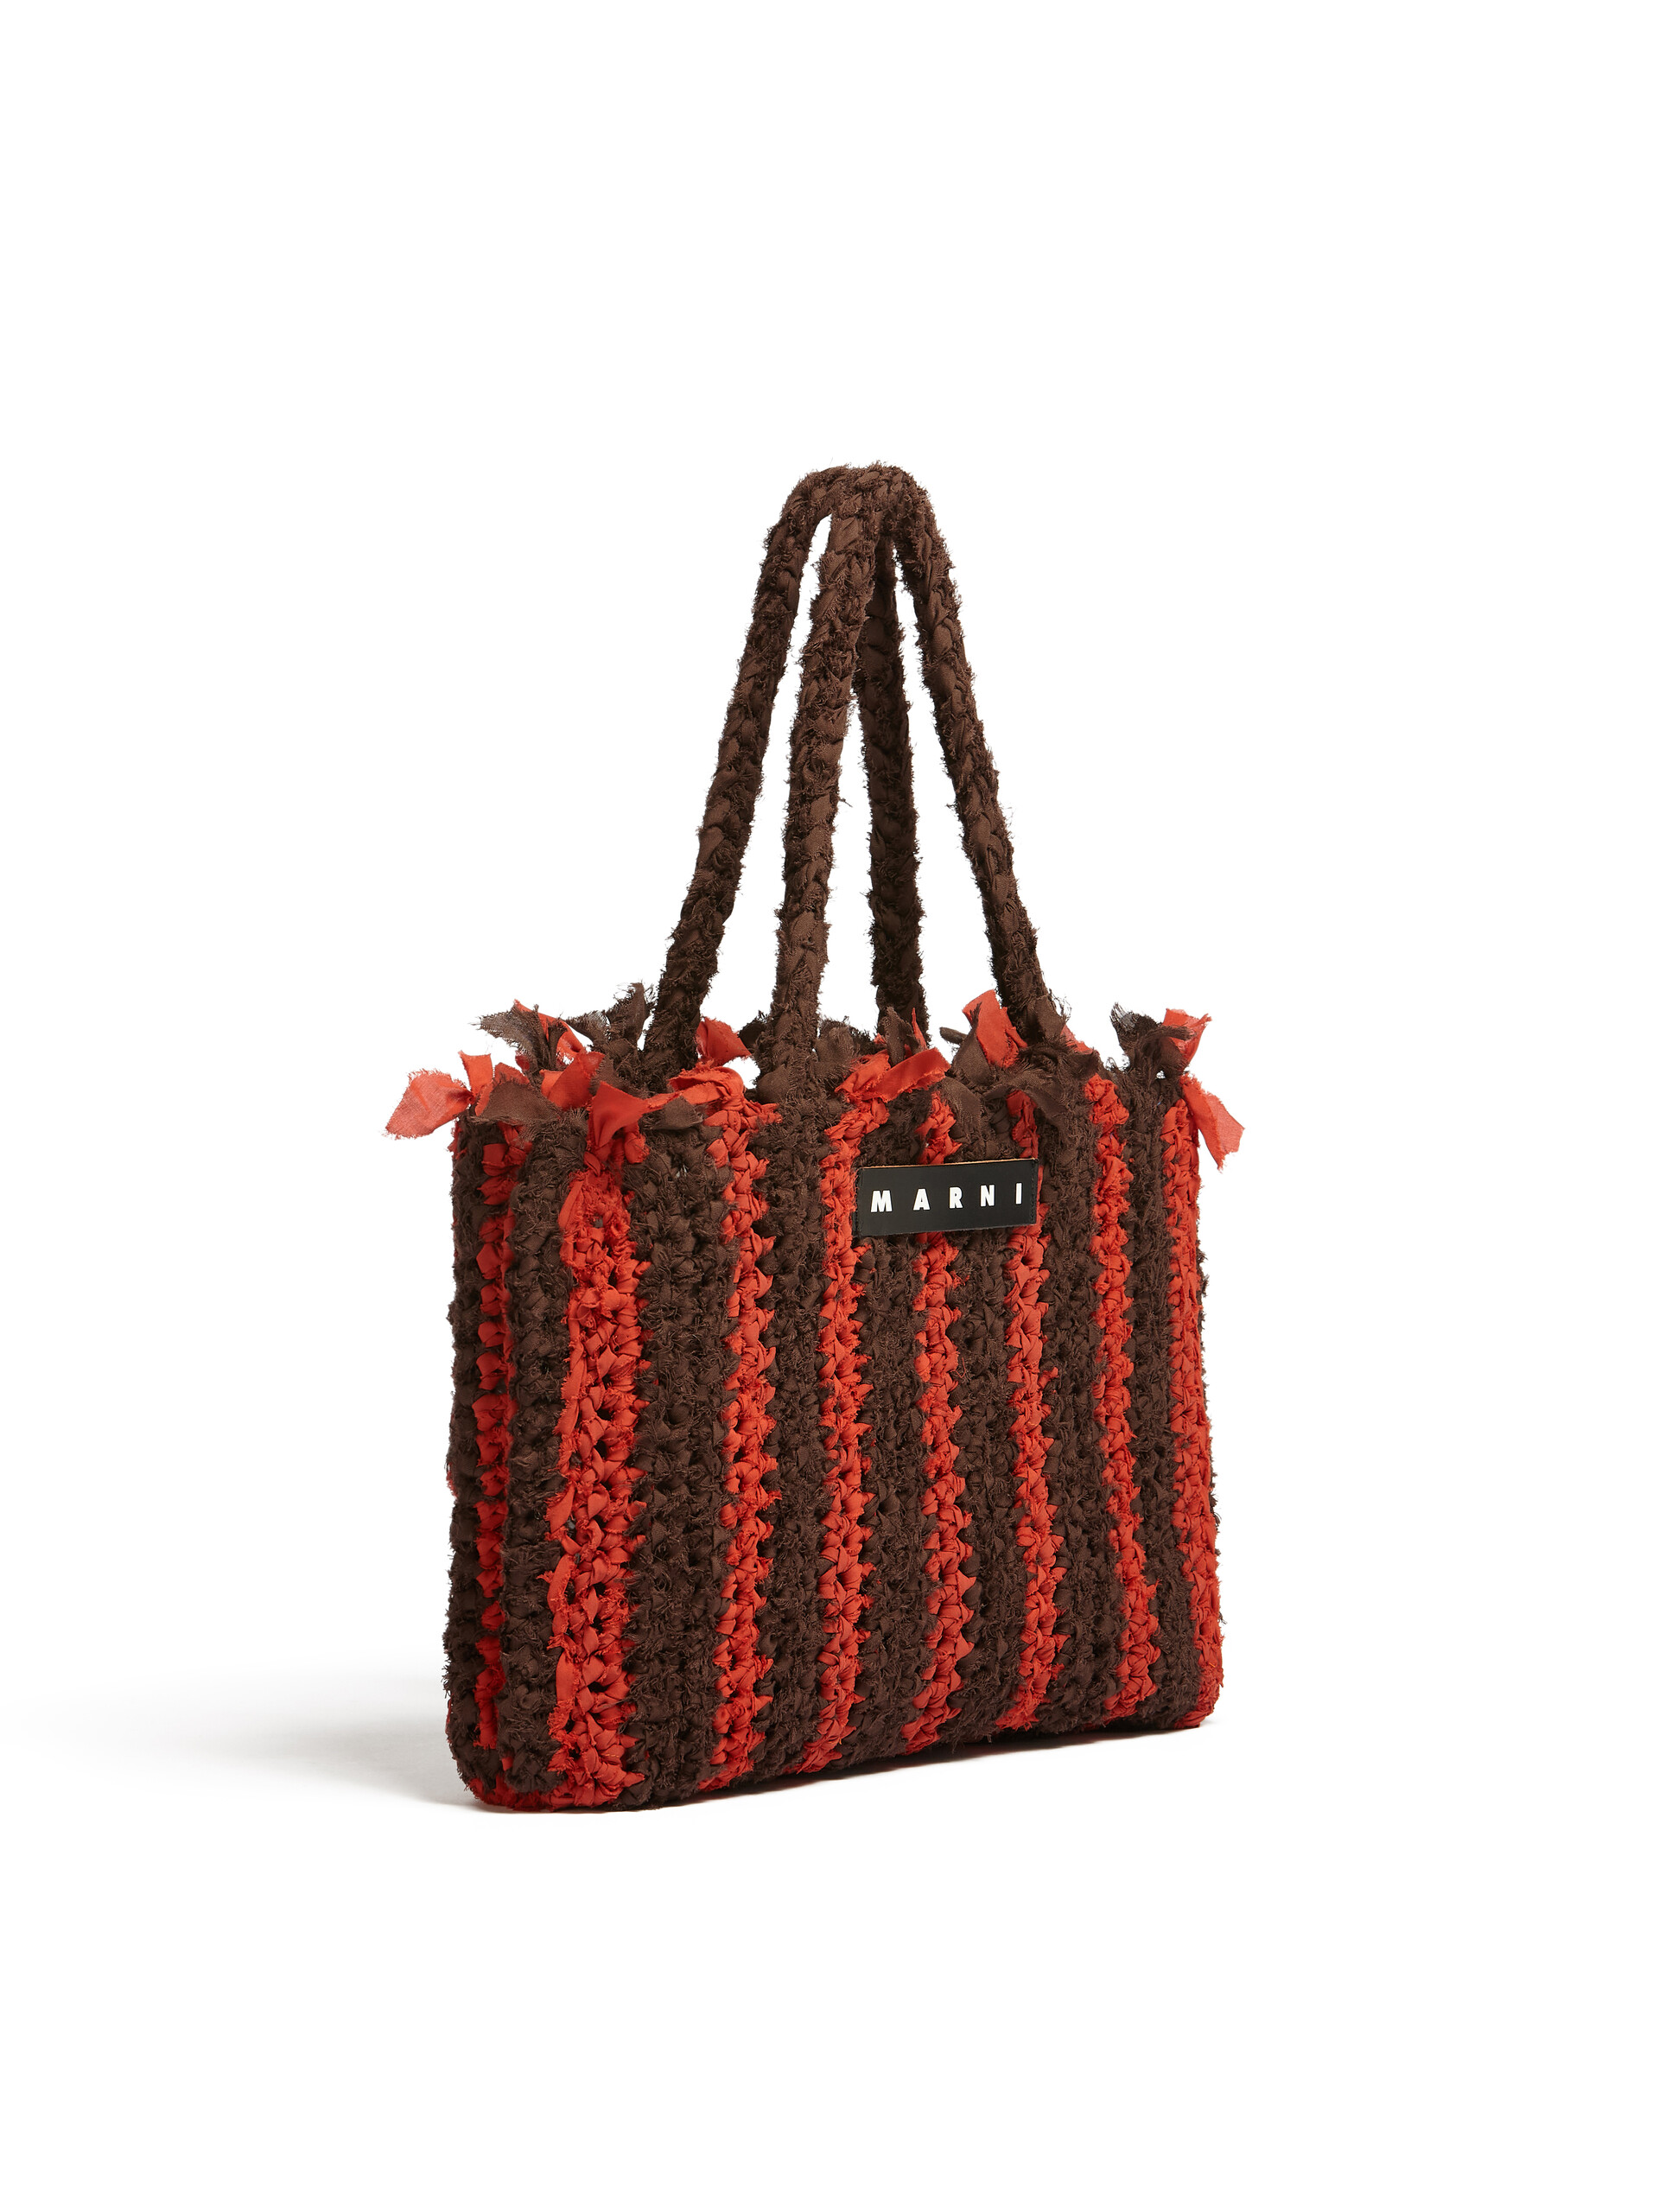 MARNI MARKET bag in brown and red cotton - Bags - Image 2